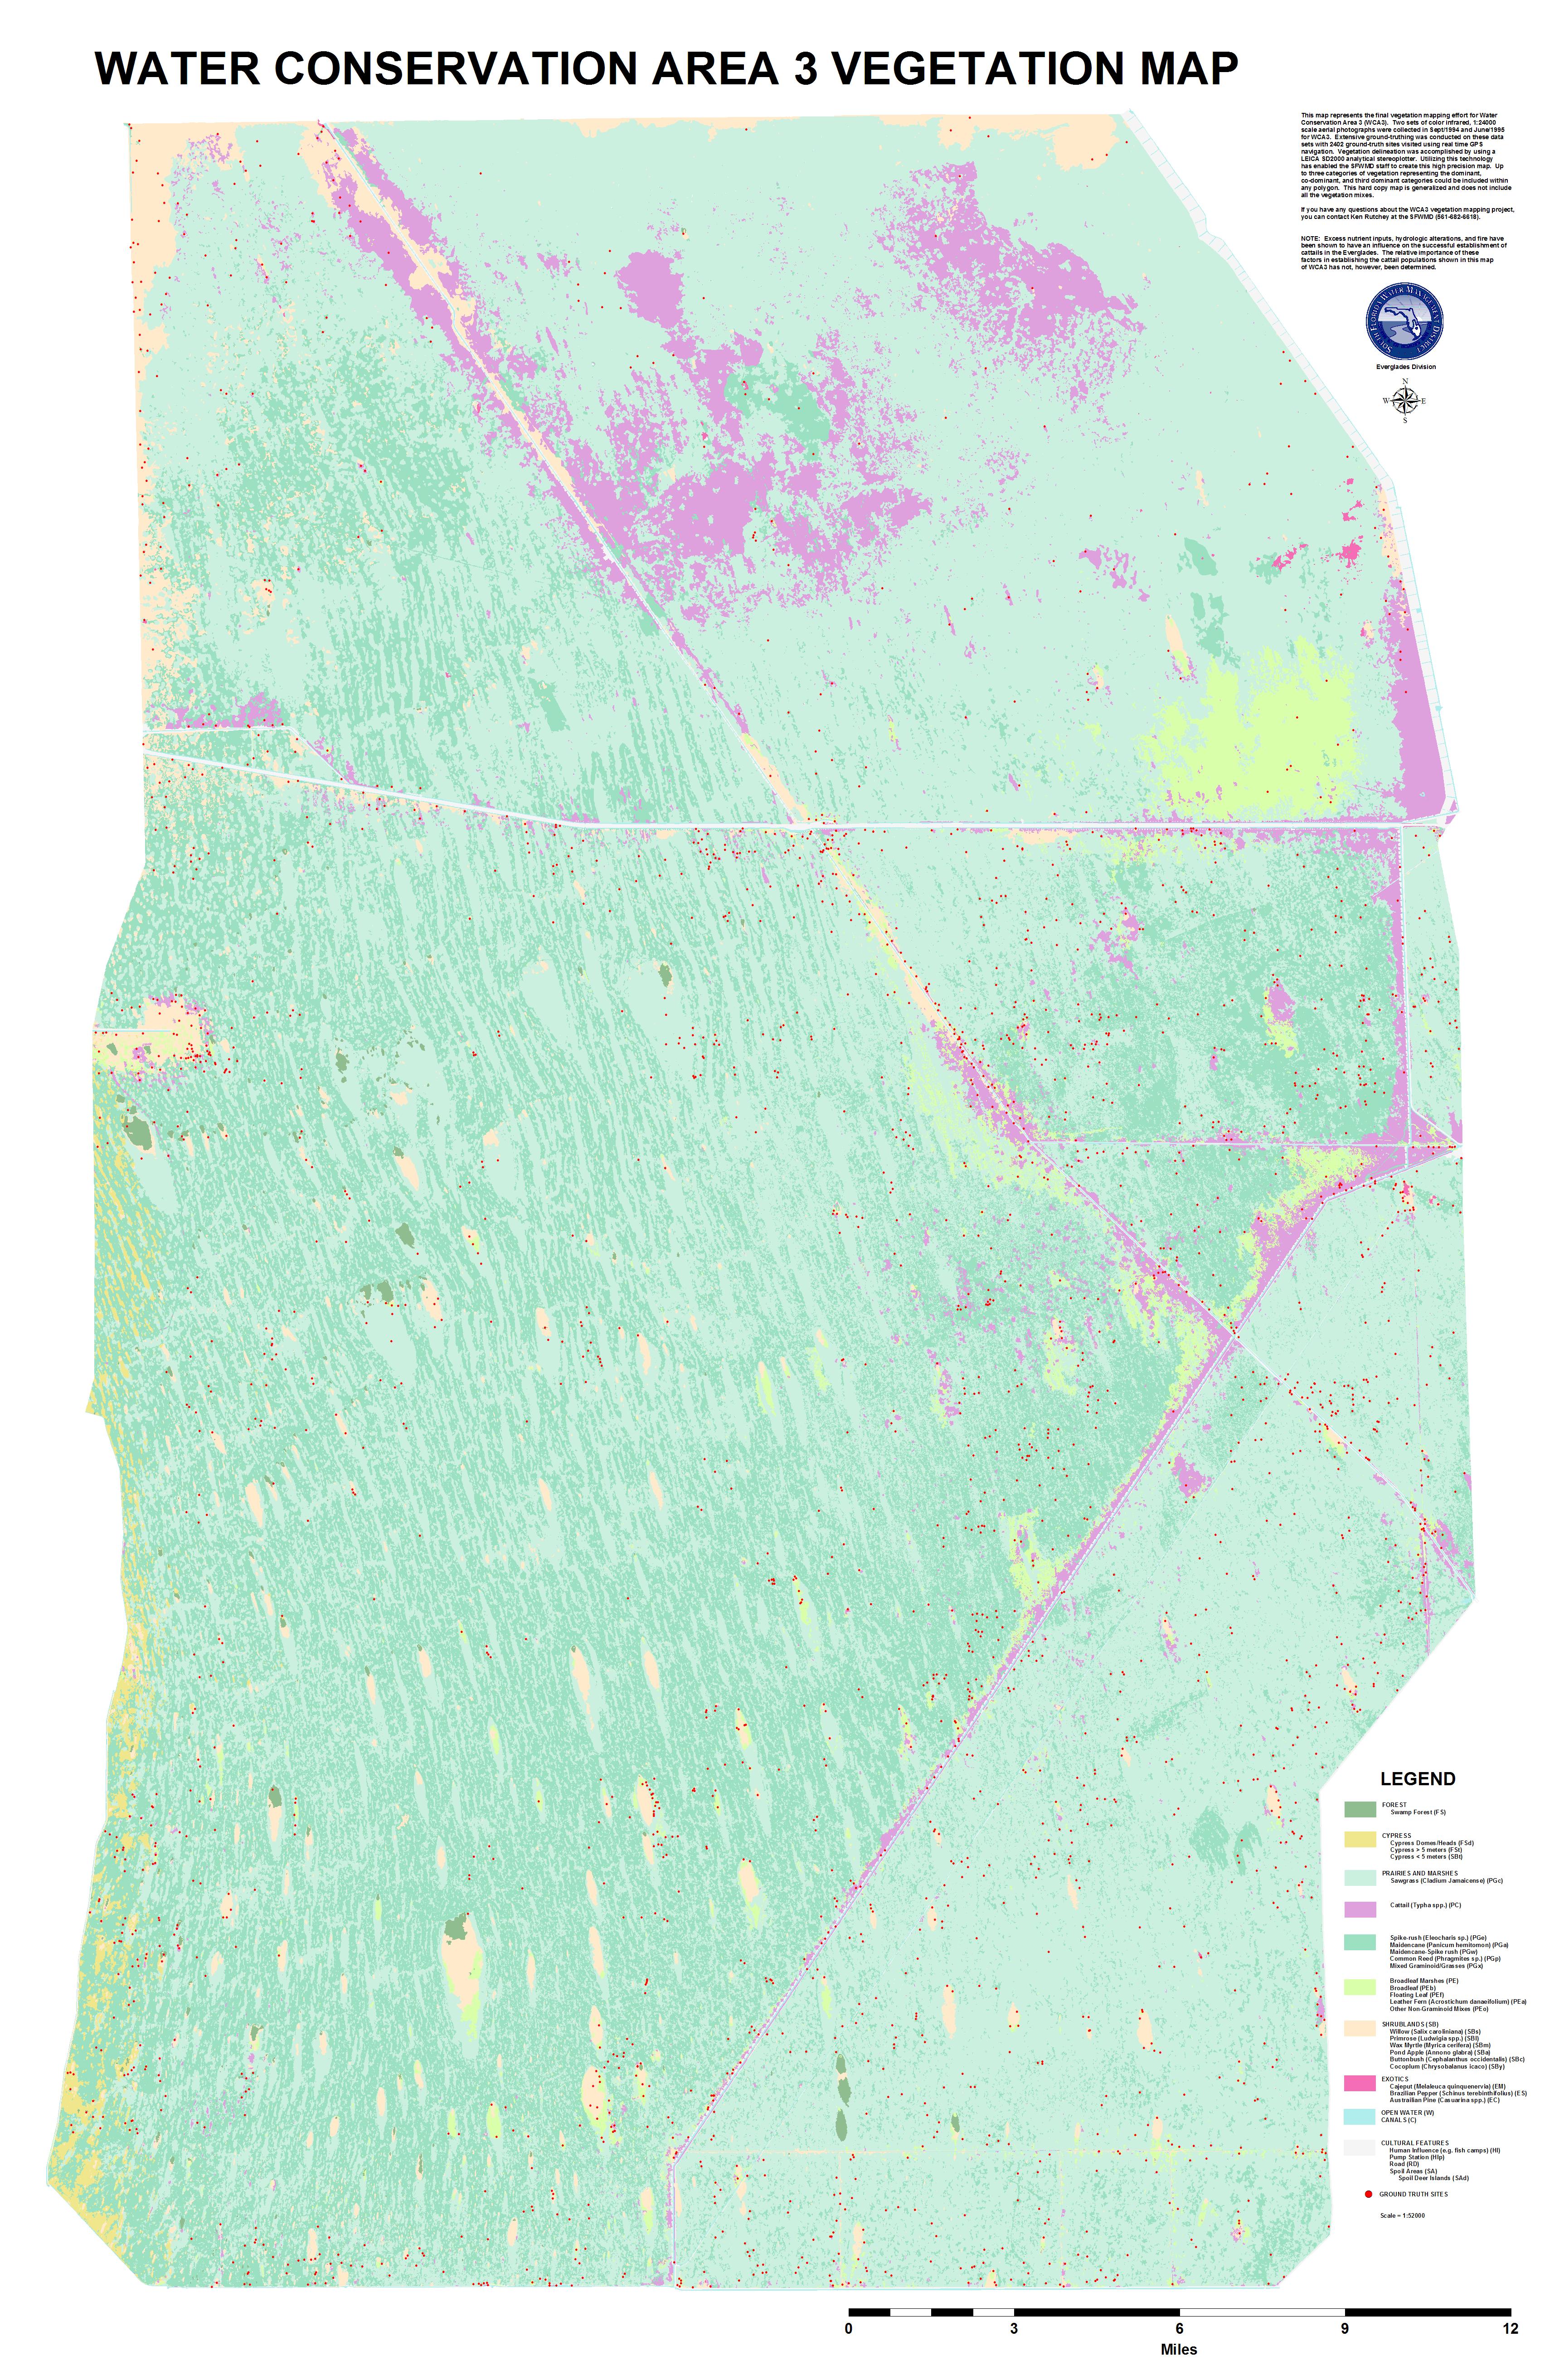 Vegetation map of Water Conservation Area 3, Everglades, South Florida (full scale)